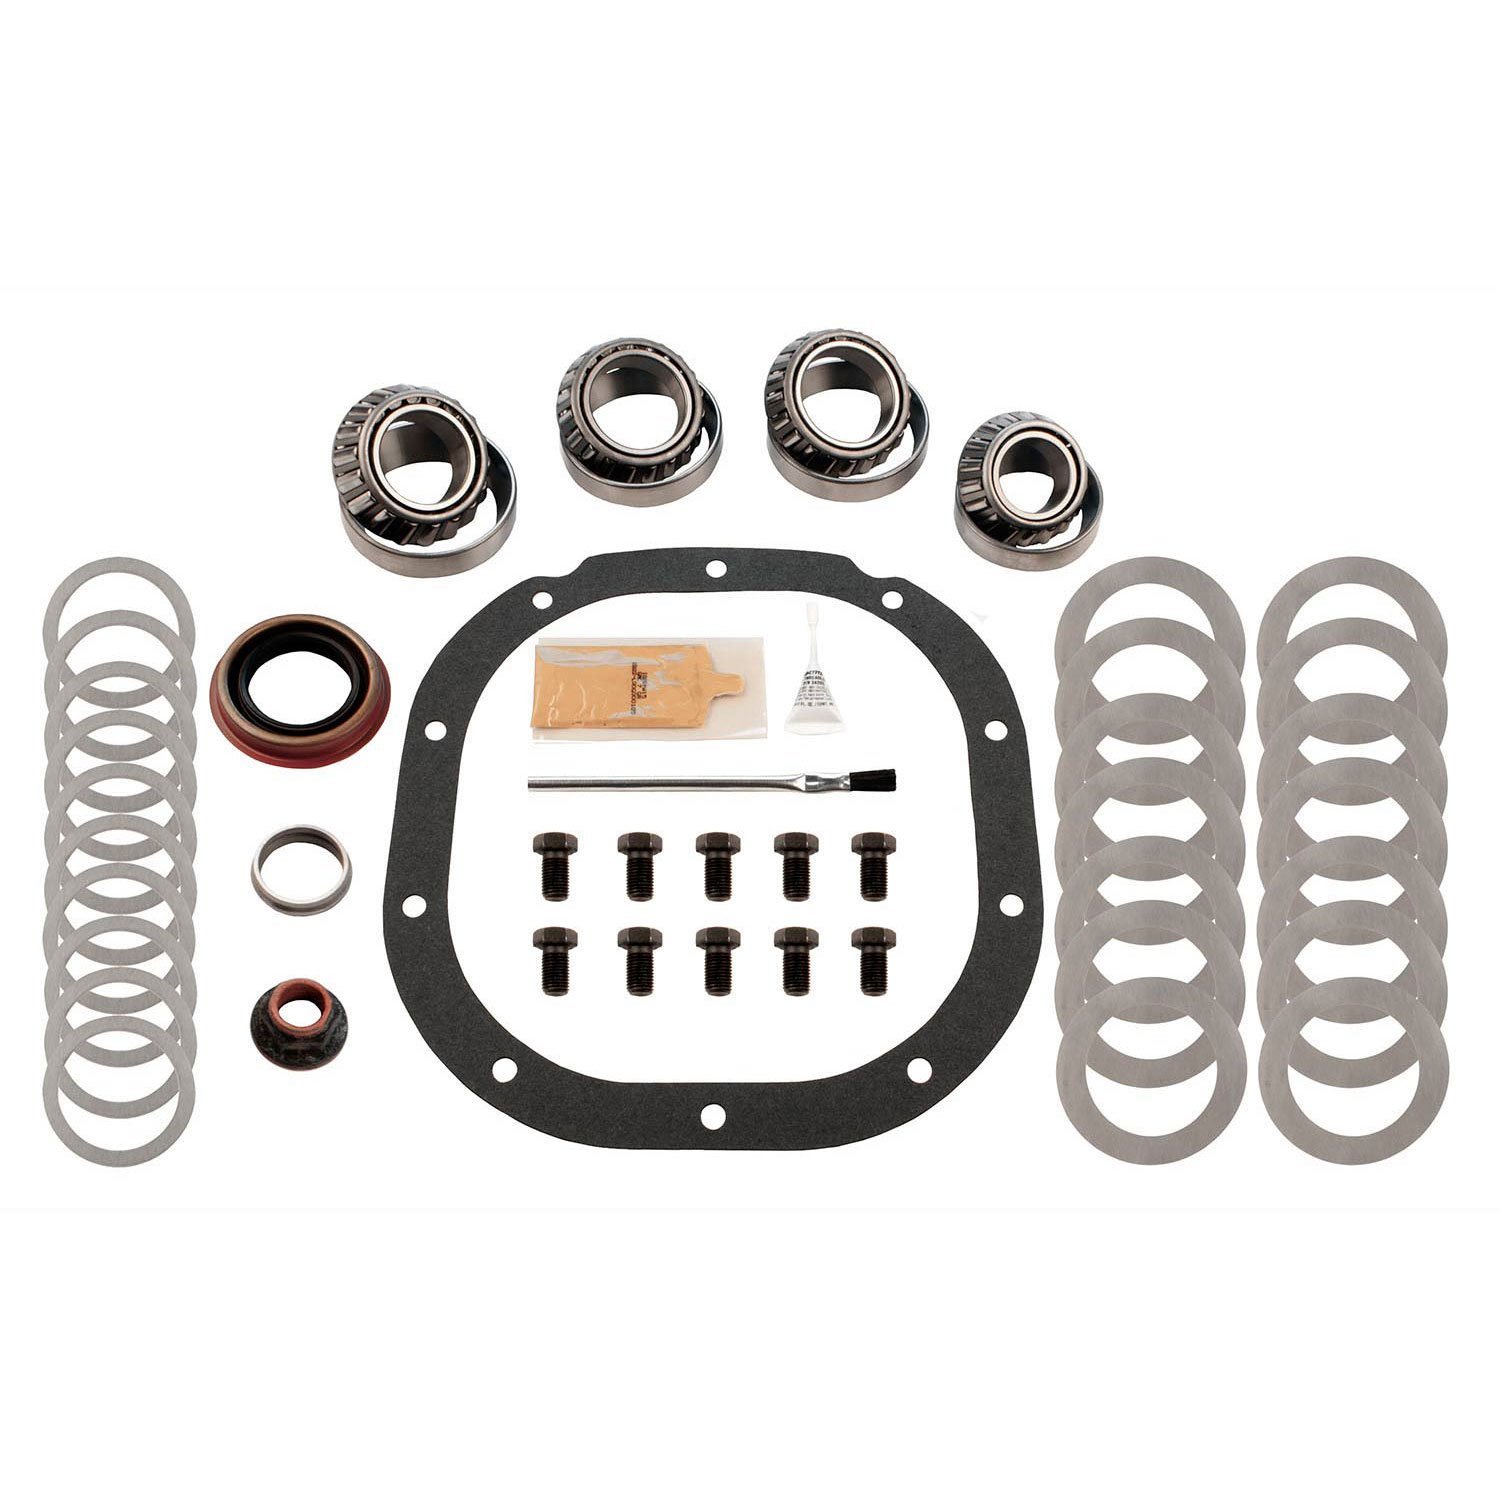 Differential Master Bearing Kit Ford 8.8 in. 10-bolt